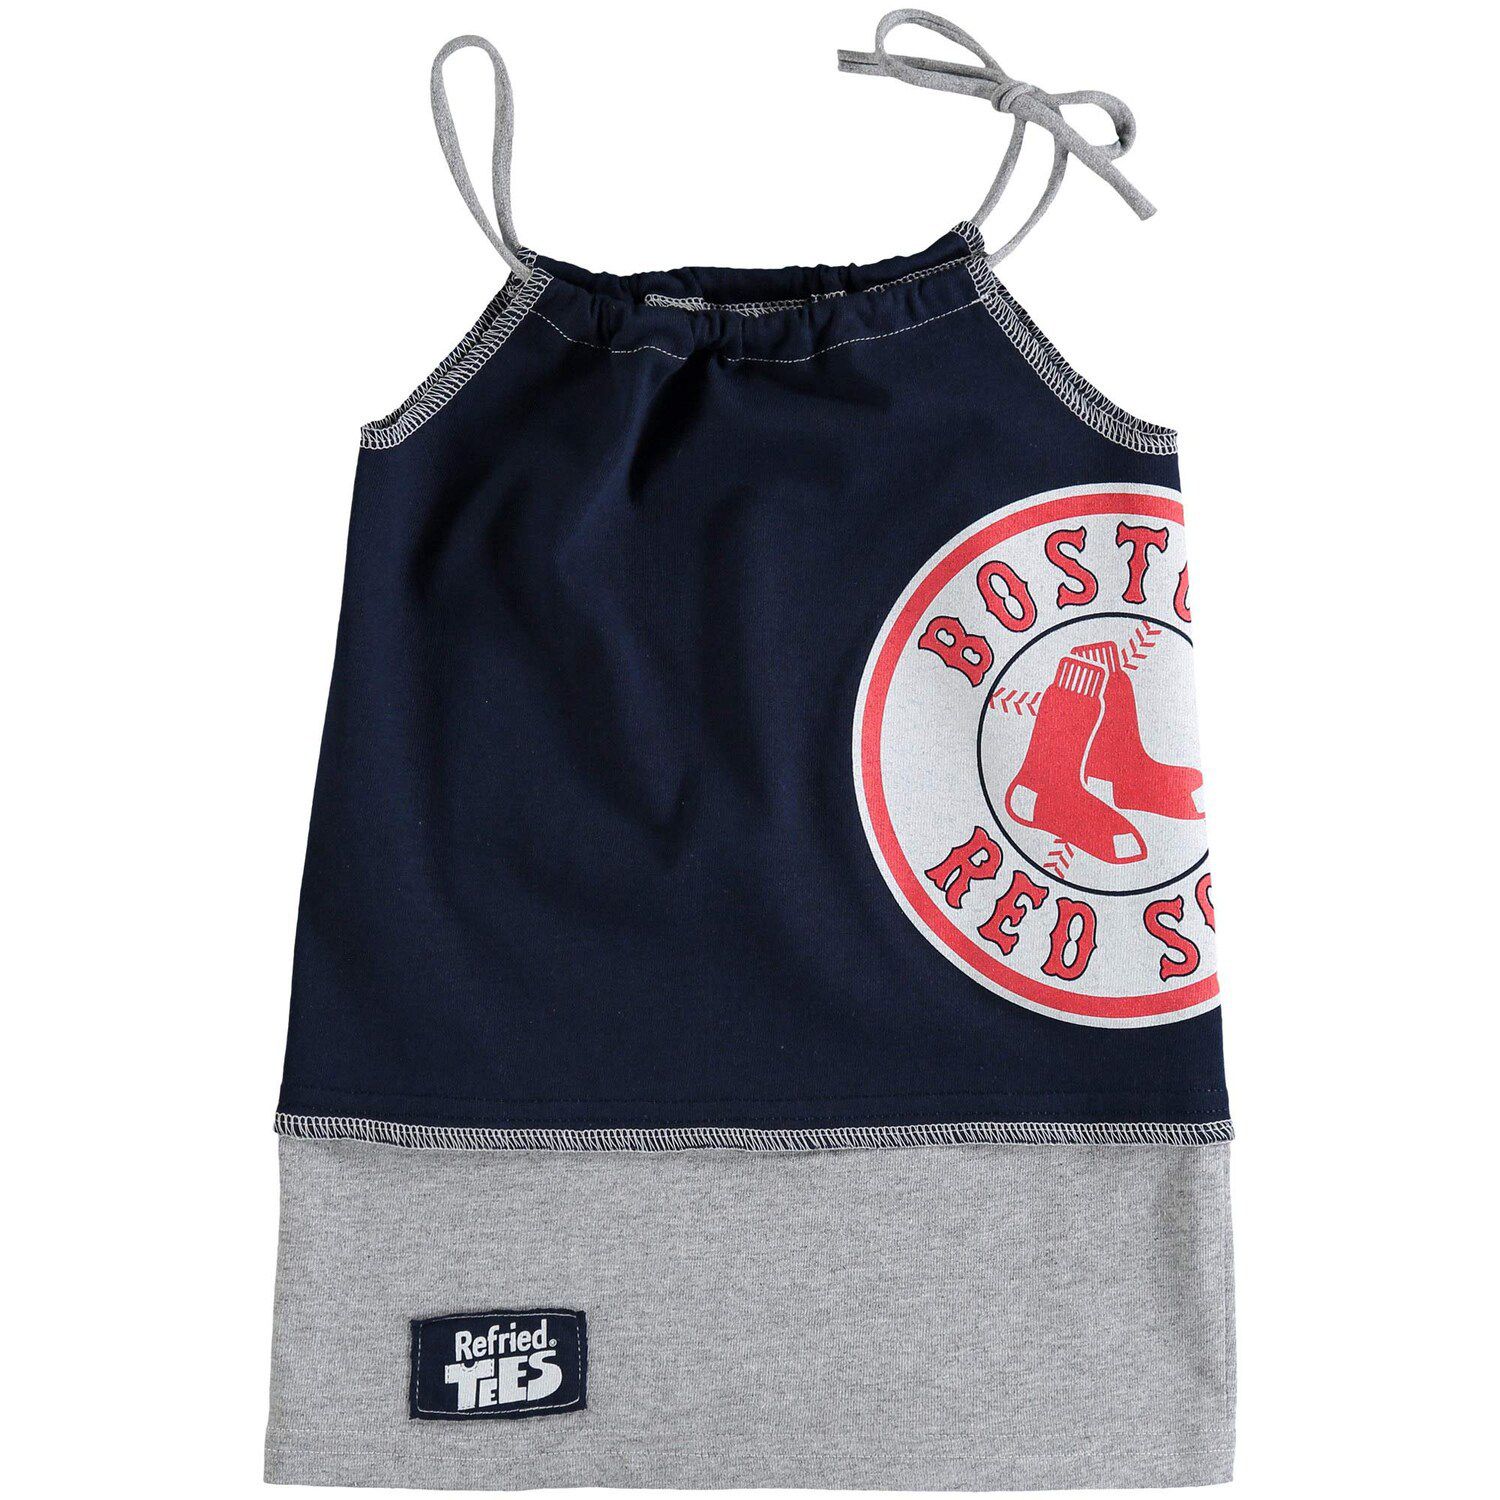 Image for Unbranded Girls Toddler Refried Apparel Navy Boston Red Sox Sustainable T-Shirt Tank Top Dress at Kohl's.